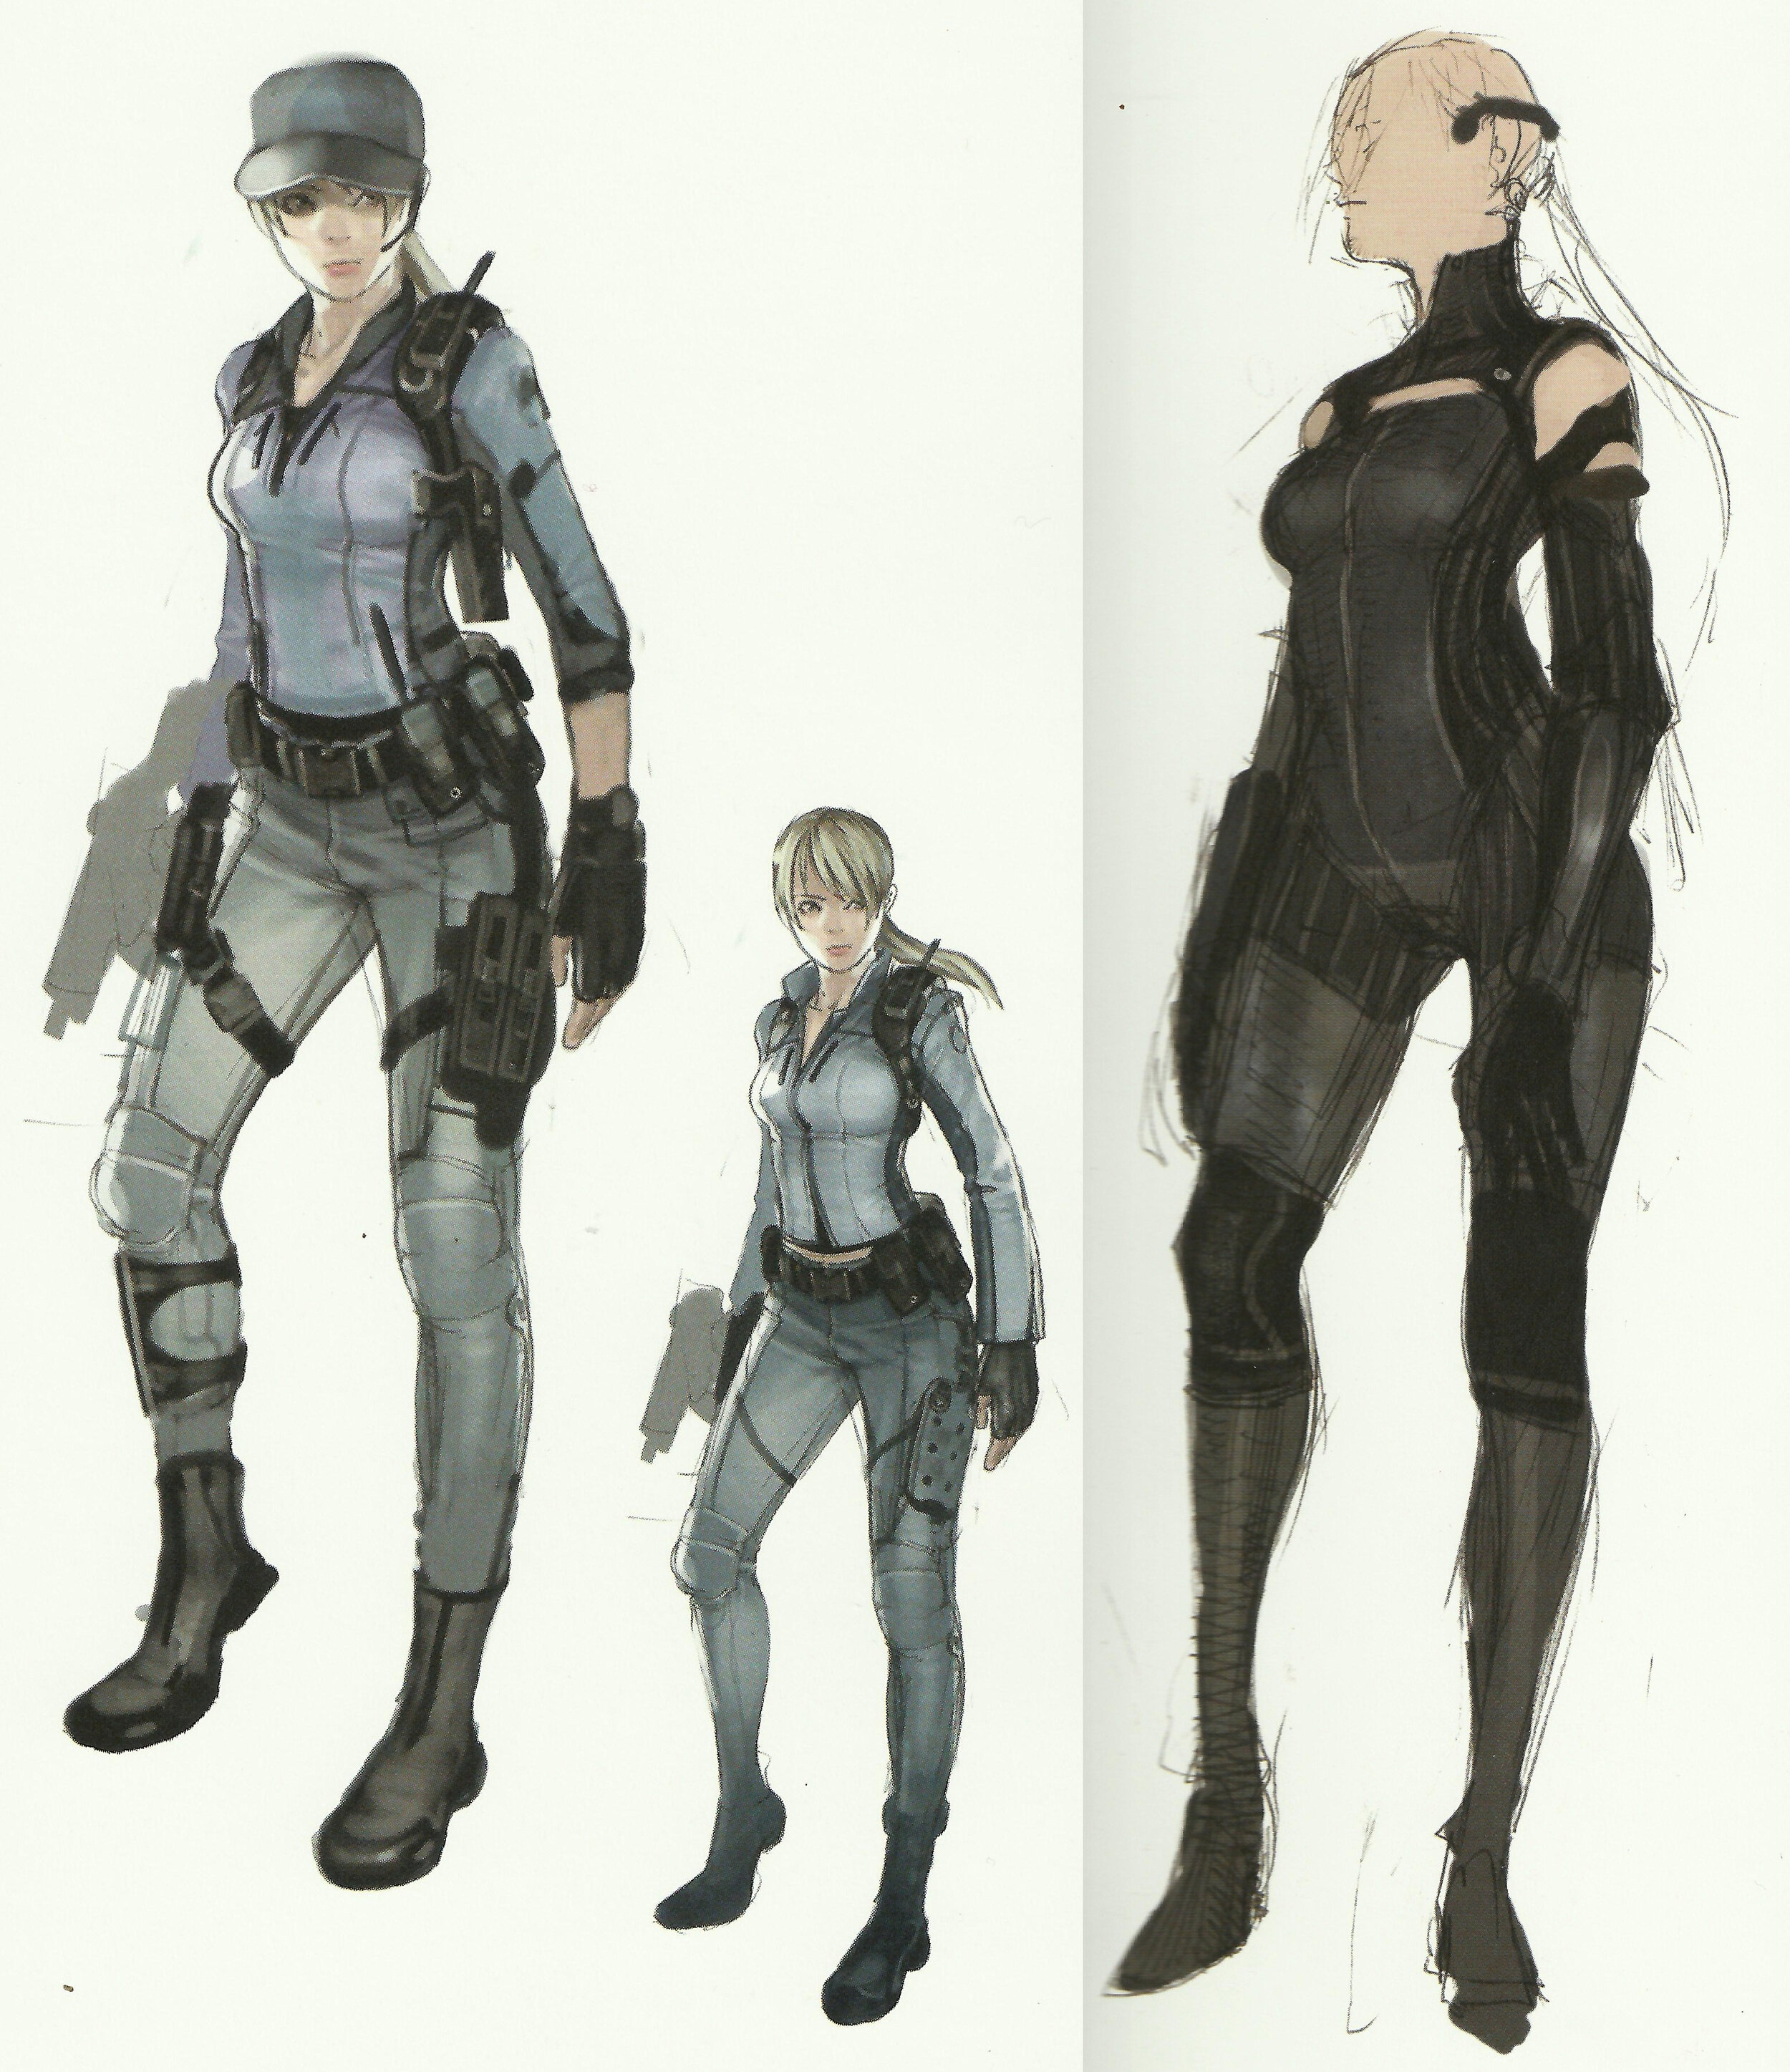 PC / Computer - Resident Evil 5 - Jill Valentine - The Models Resource